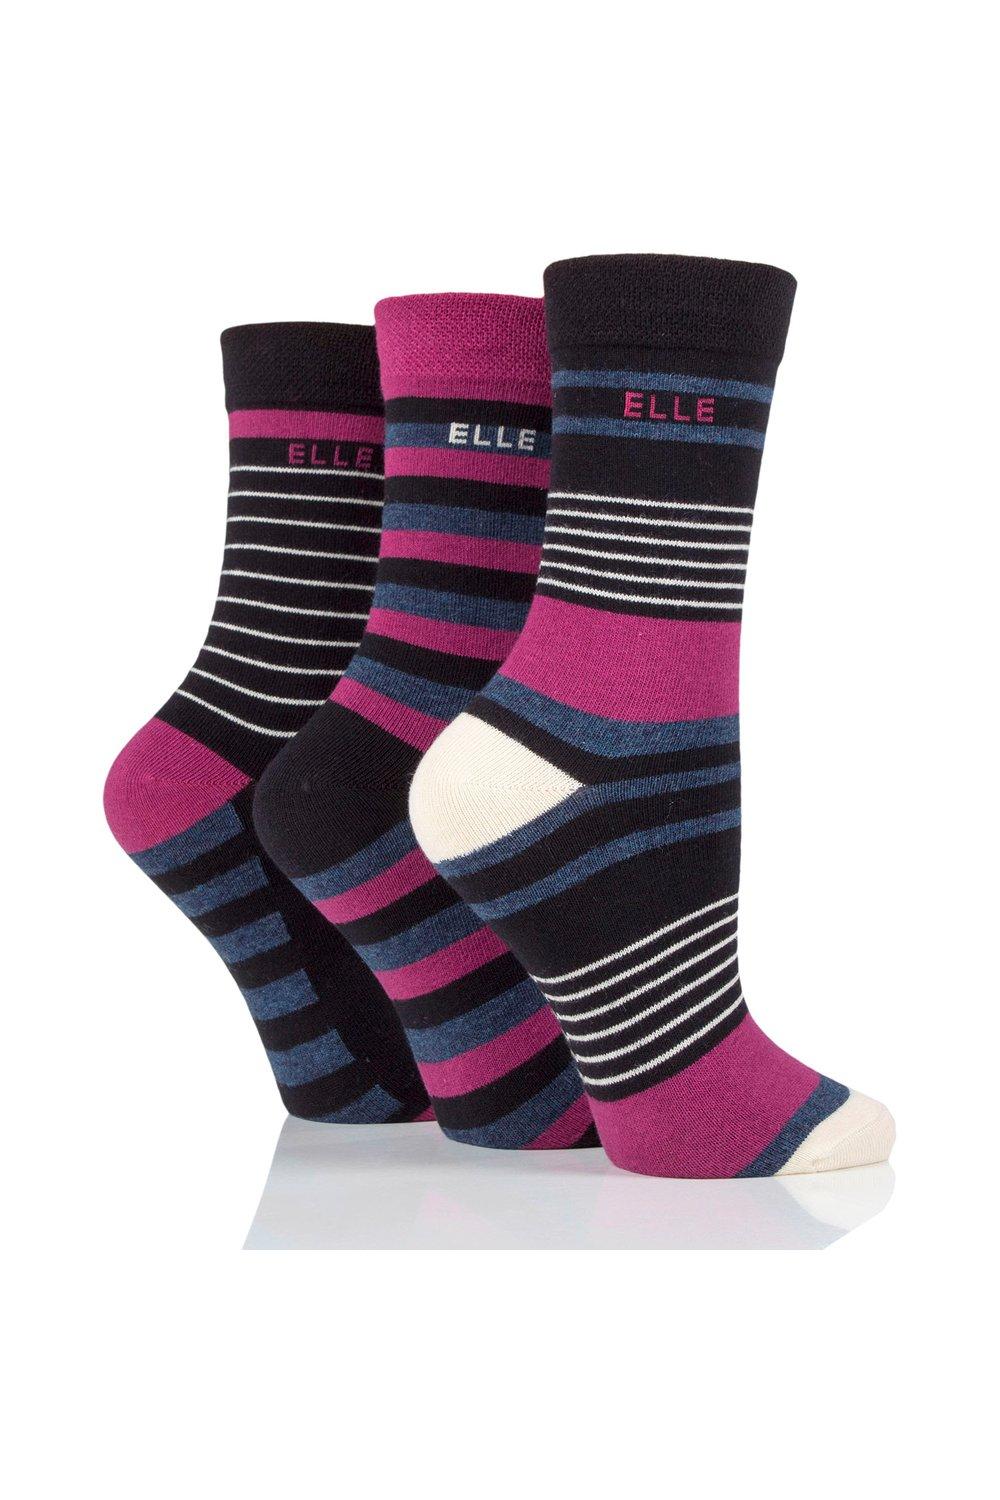 3 Pair Plain, Striped and Patterned Cotton Socks with Hand Linked Toes